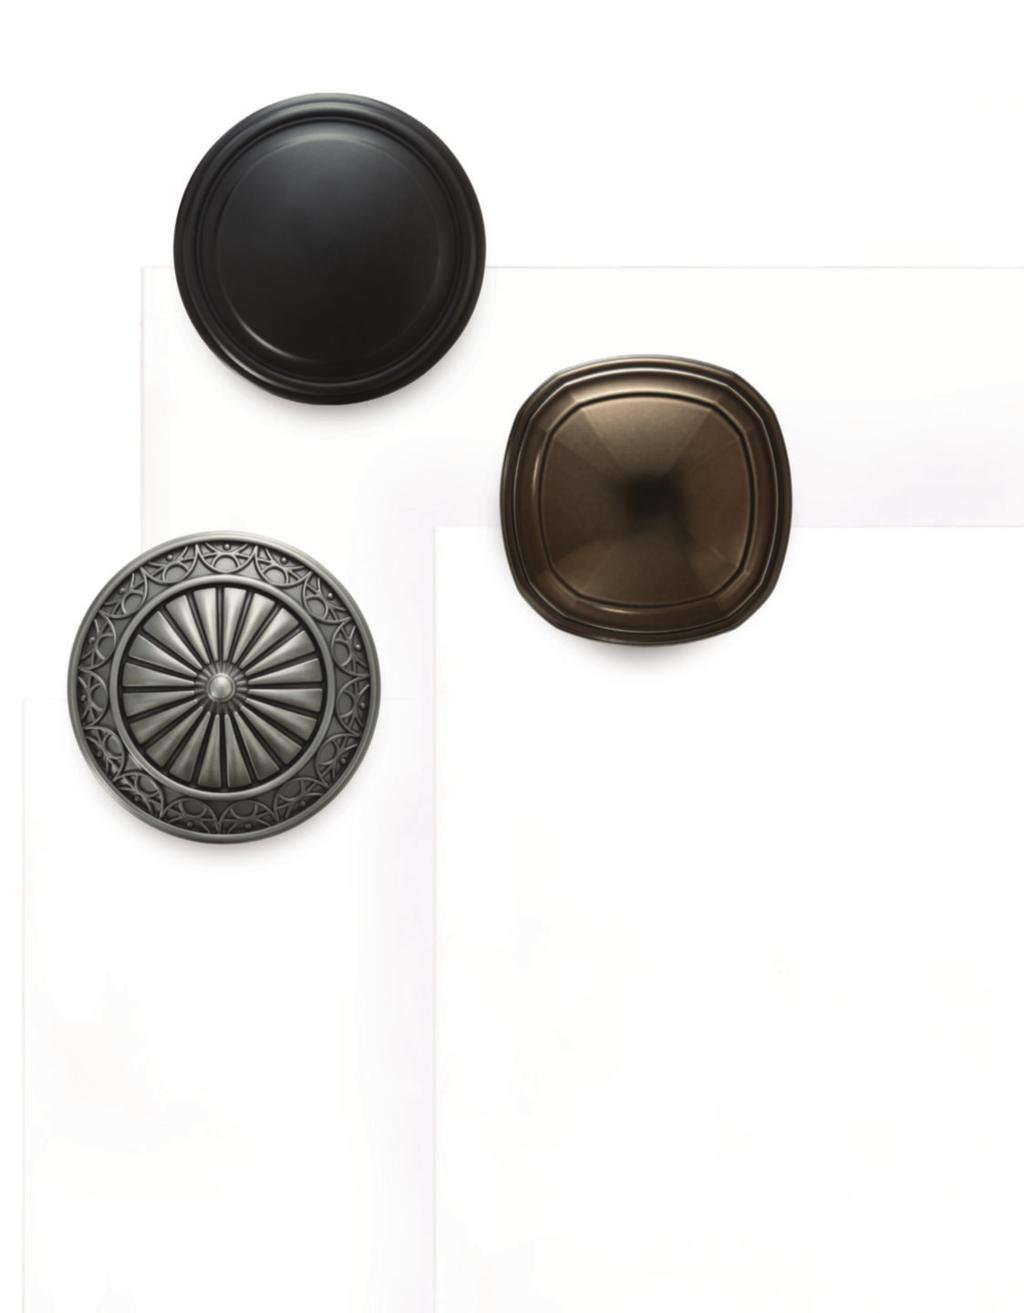 HOLDBACKS HOLDBACK ARM WITH ENDCAP Antique Silver Shown. CONTEMPORARY ROUND Black Shown. Available in 3", 4½".